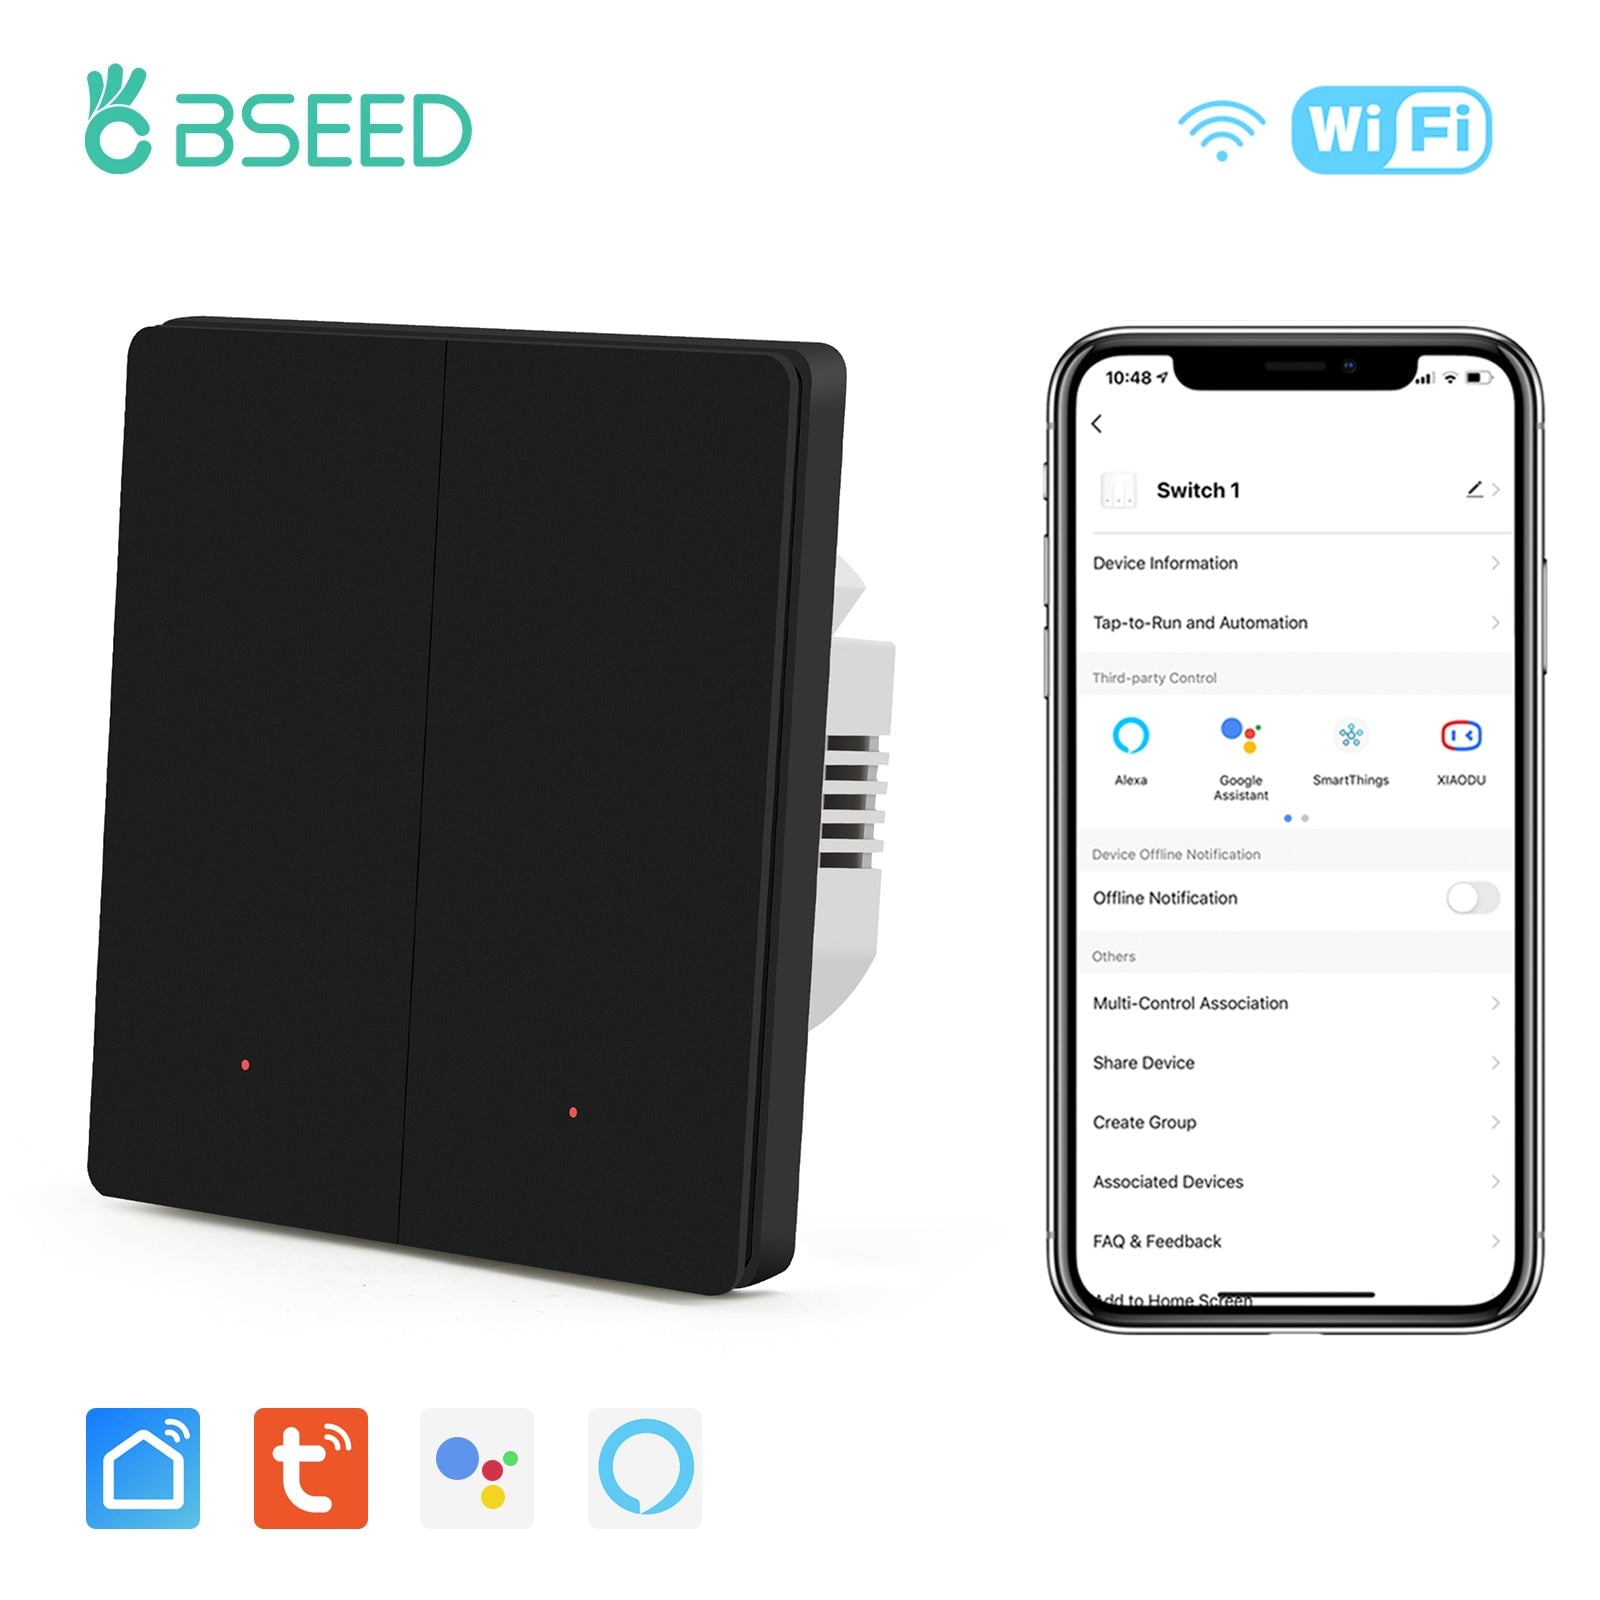 BSEED WiFi Automatic Rebound Smart Wall Light Switches Neutral Switch Bseedswitch Black 2gang 